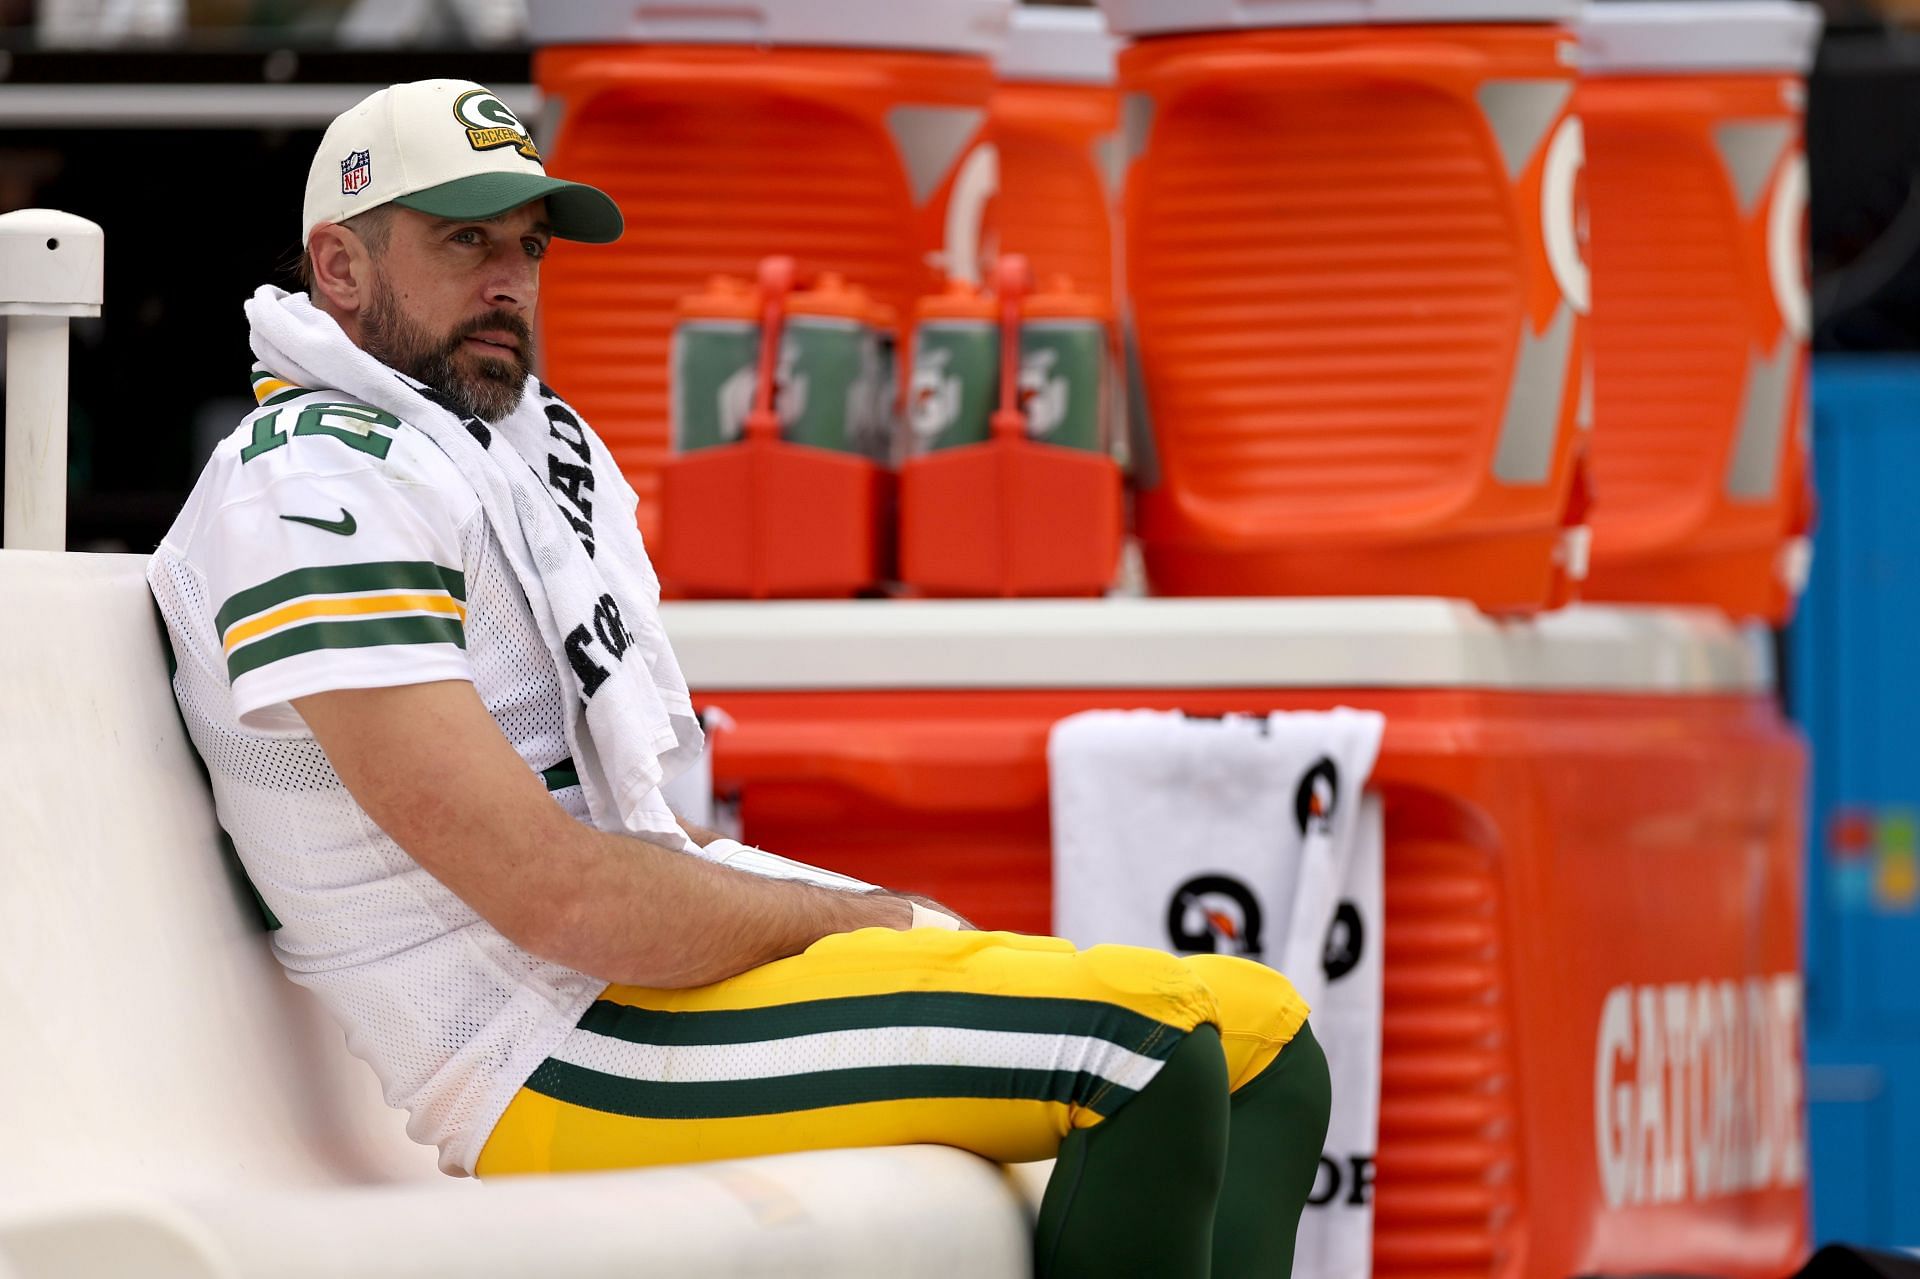 Green Bay Packers QB Aaron Rodgers after their loss to the Washington Commanders